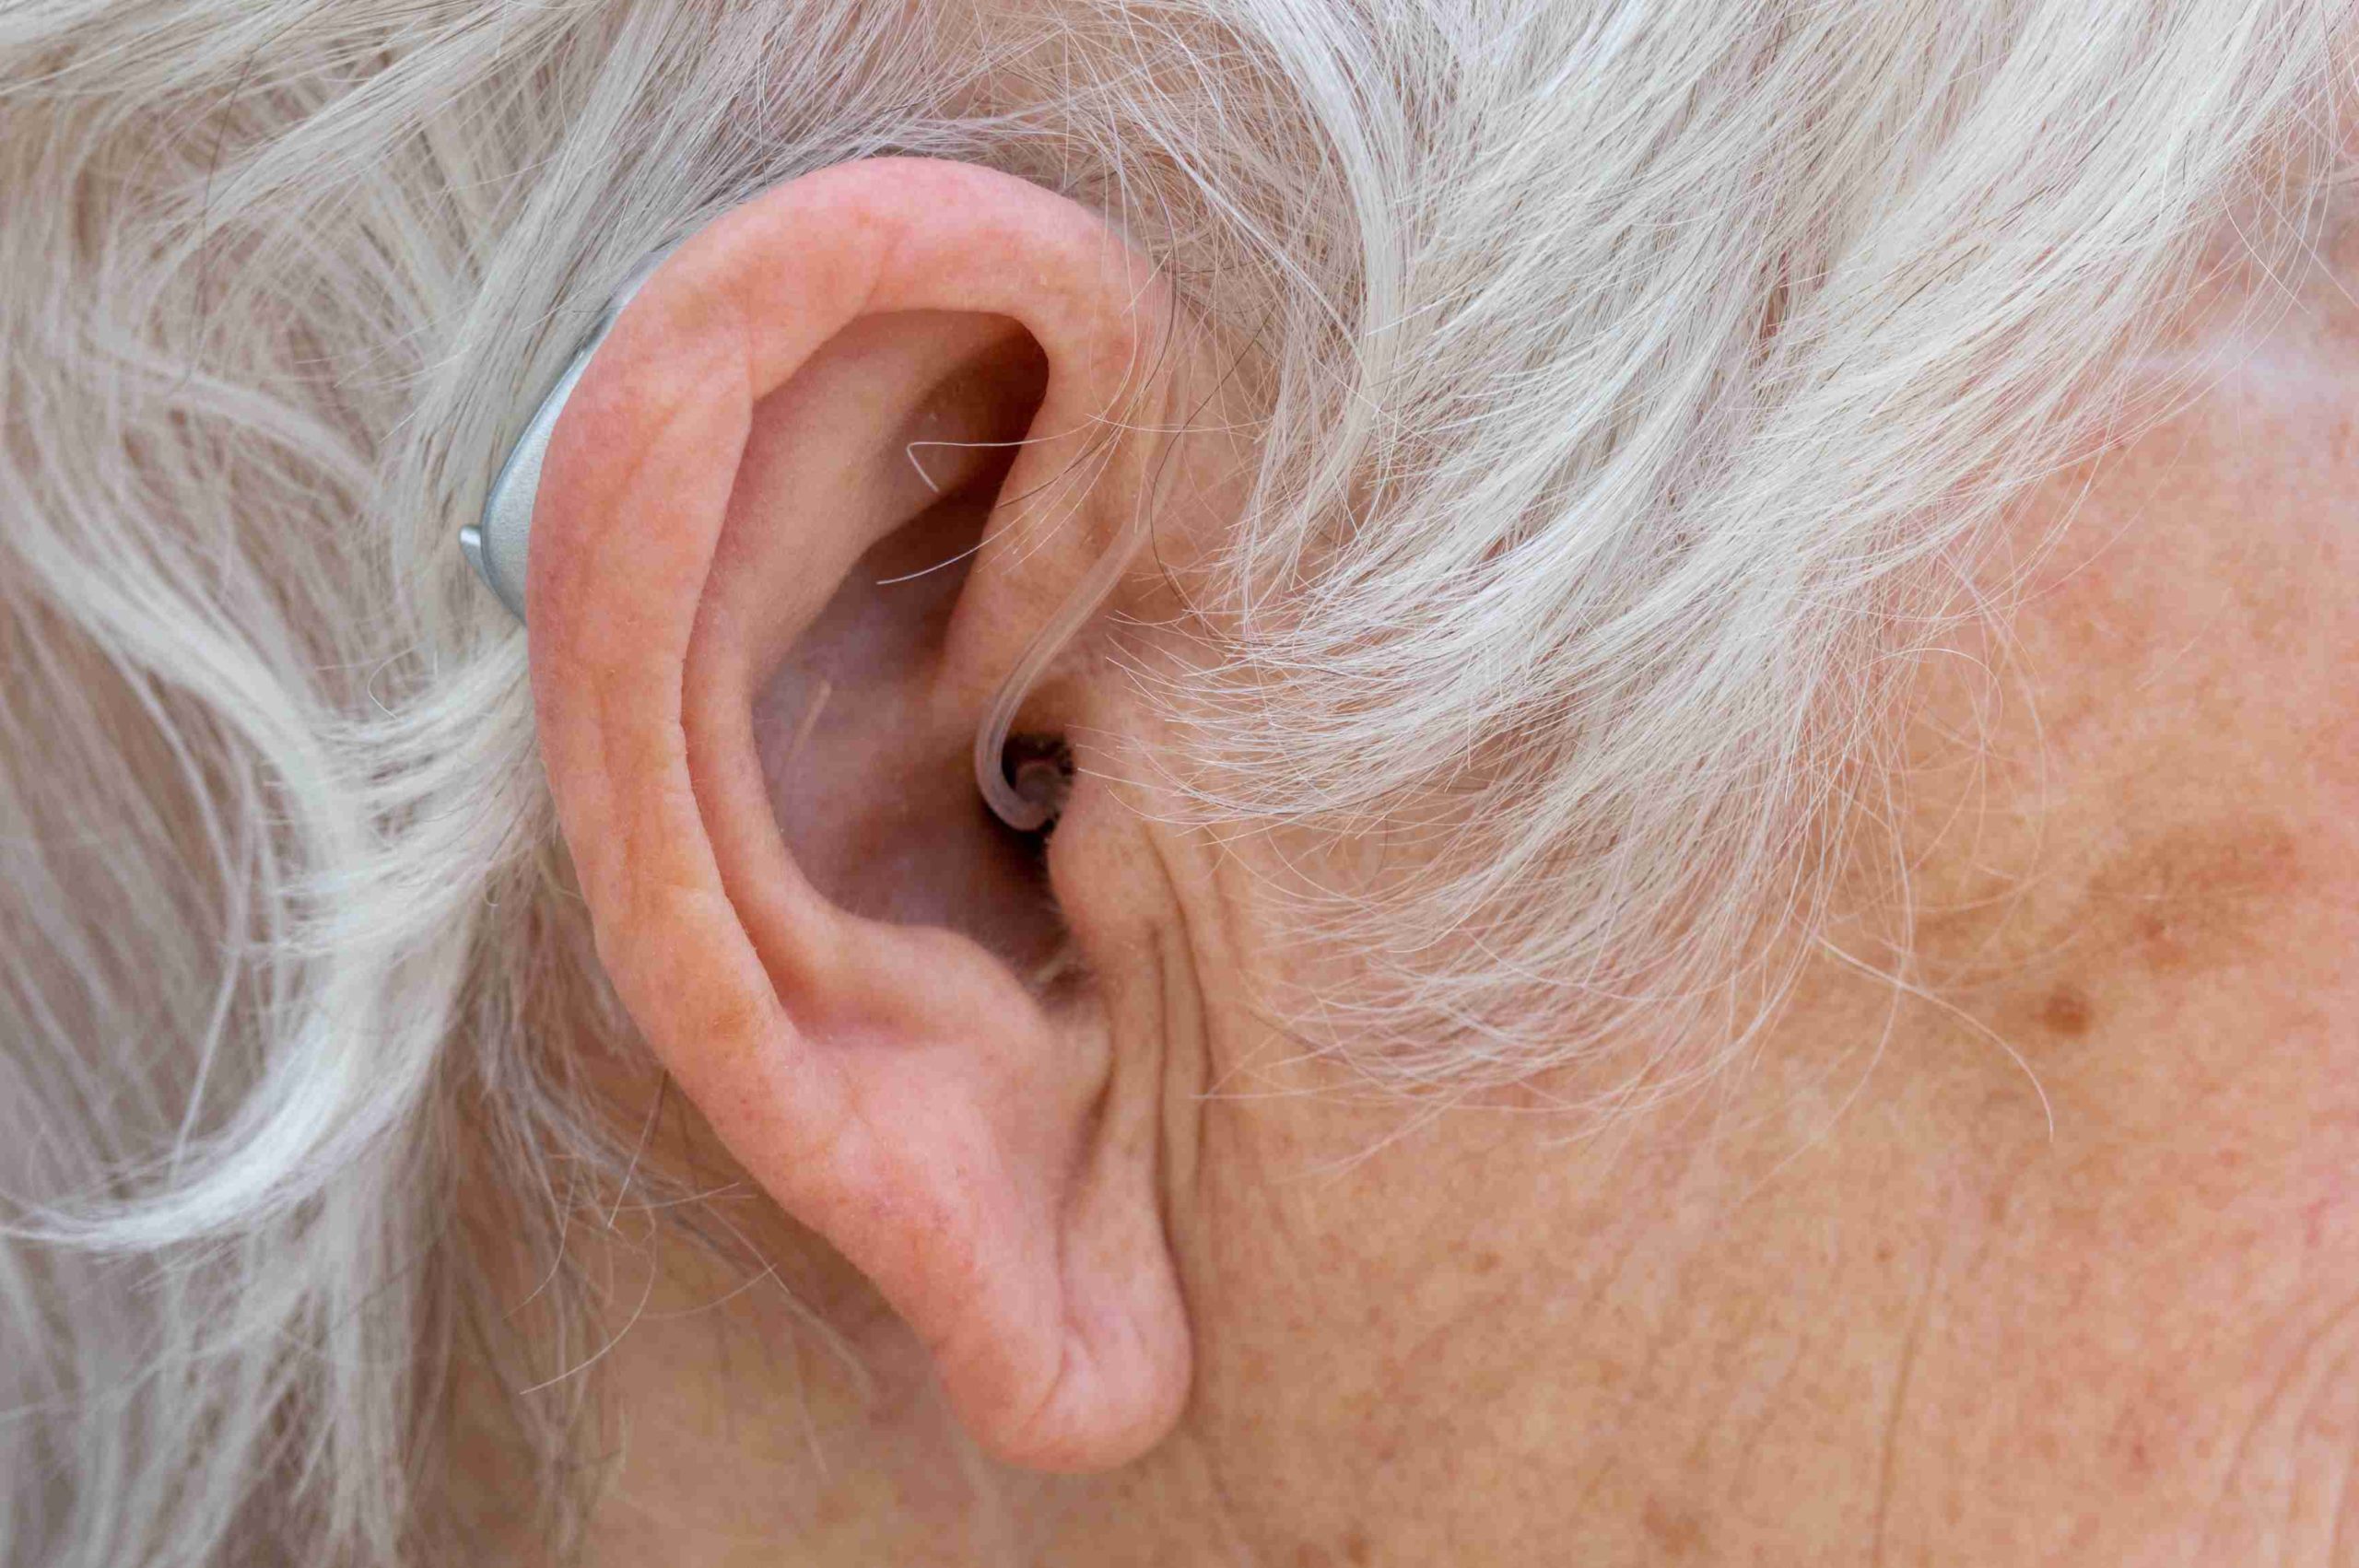 Receiver in canal hearing aid being worn by a woman